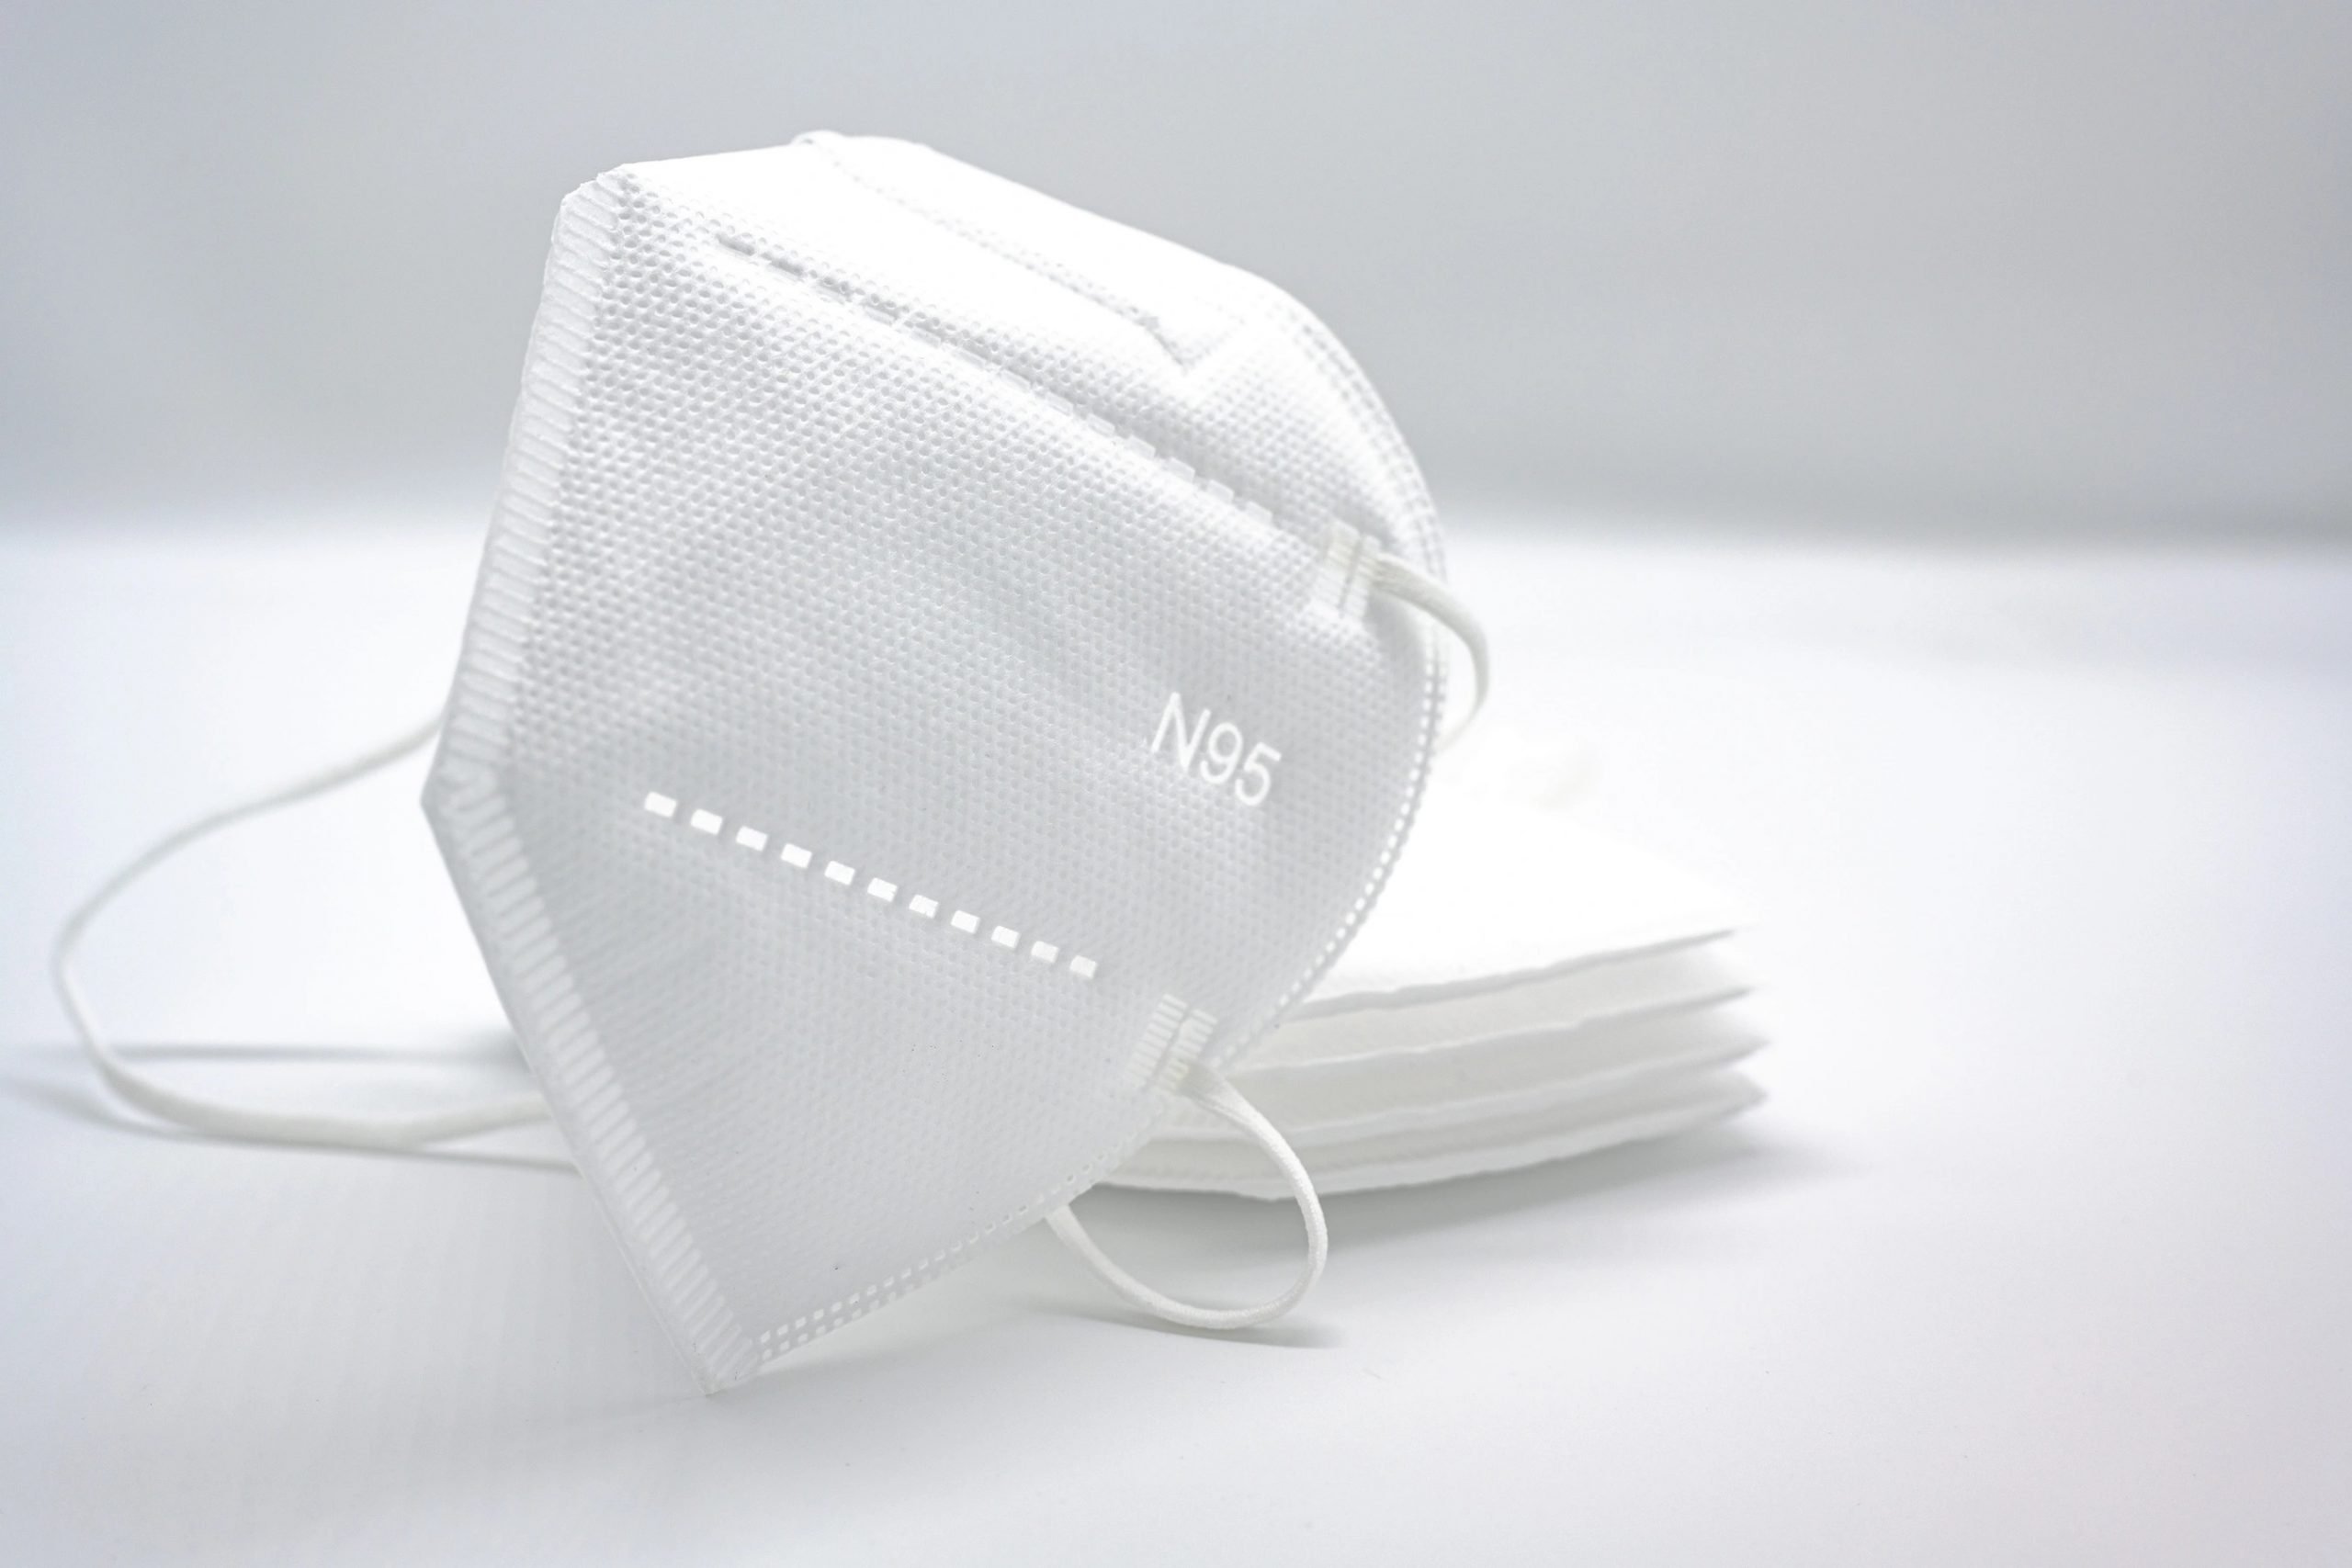 How Well Do N95 Face Masks Protect Against COVID-19?